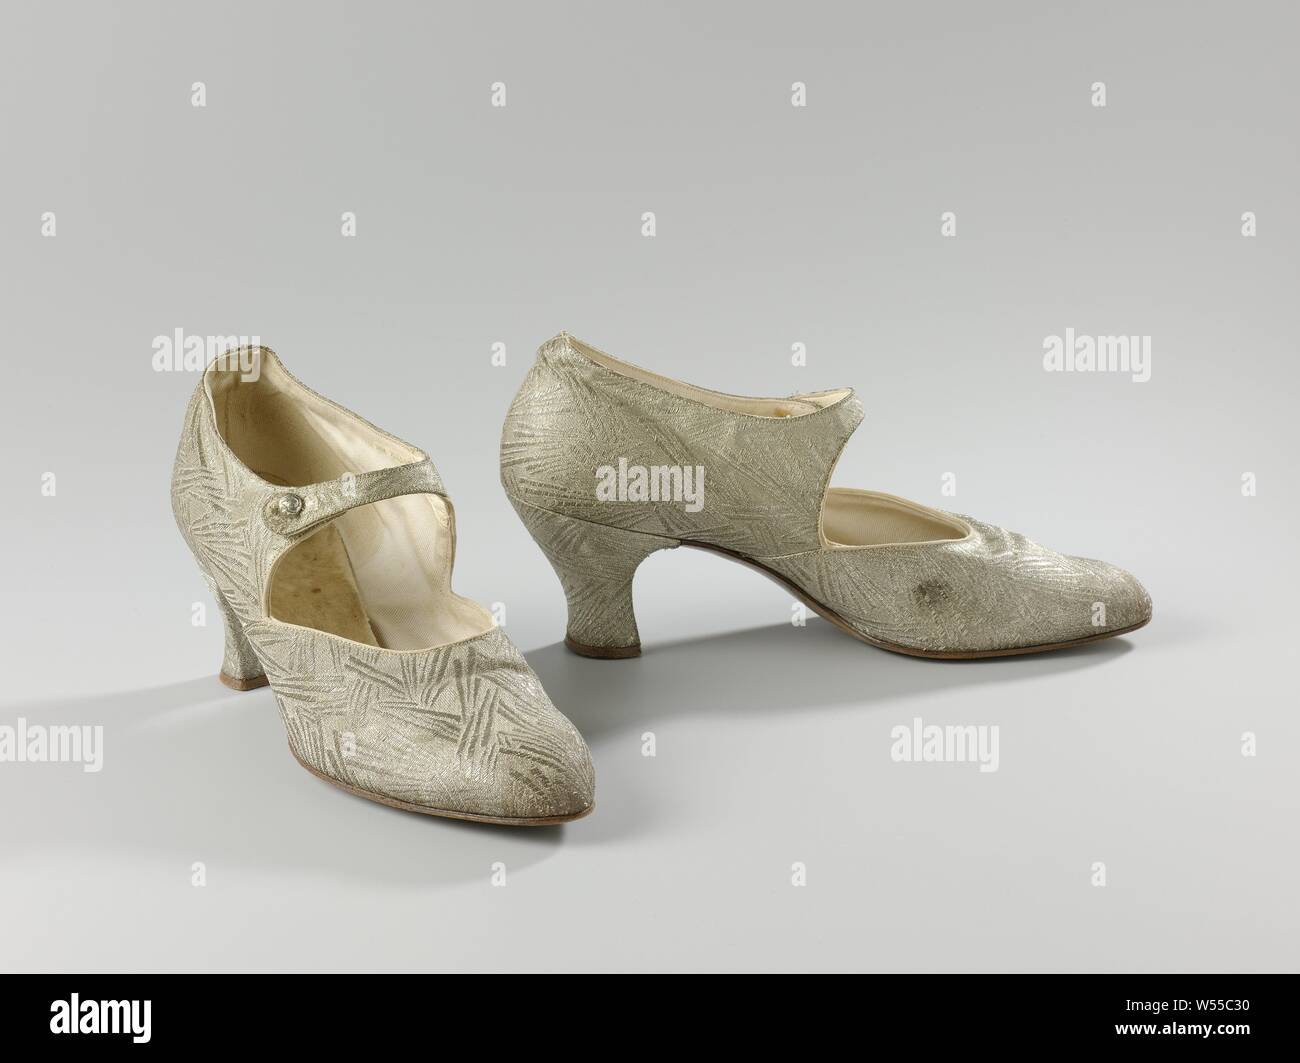 Women's shoe made of silver brocade with ankle strap, Women's shoe made of silver brocade with ankle strap. Model: The rounded pointed nose, one front sheet and two side sheets. The cut-out of the cover runs halfway down the geleng. The side sheets are perpendicular to the front sheet. An ankle strap is attached to the right-hand side sheet. A silver-colored button is attached to the left-hand side panel through a metal eye. The front of the heel runs straight down at a rounded corner. The side and back of the narrow heel are fitted and covered with silver brocade. The heel has a brown leather Stock Photo